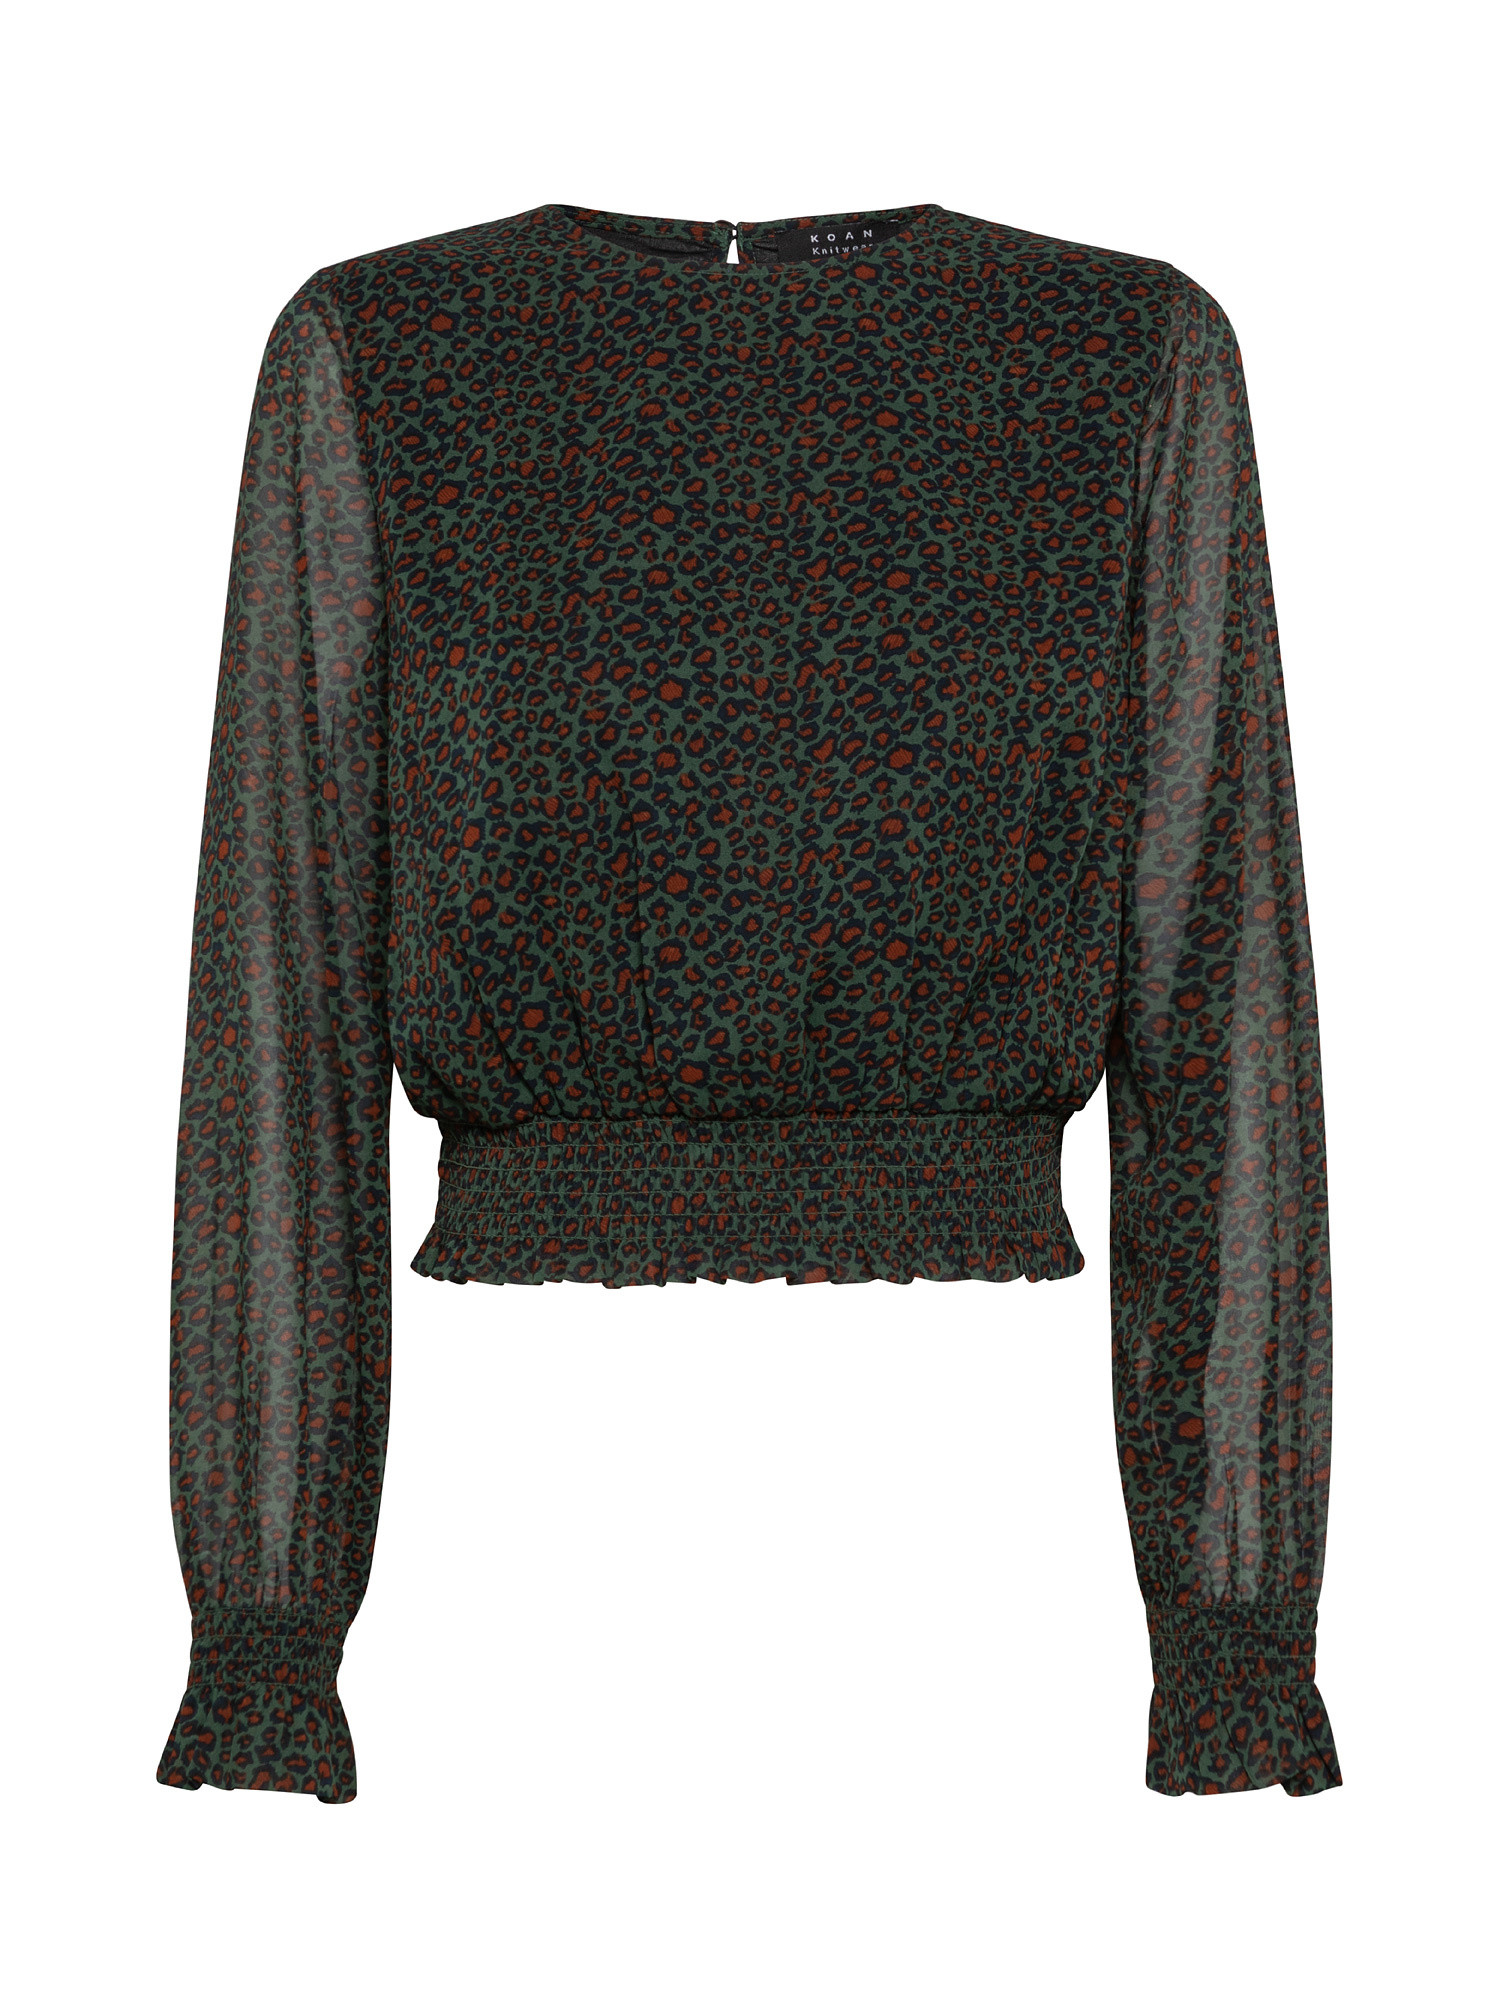 Blouse with pattern, Black, large image number 0